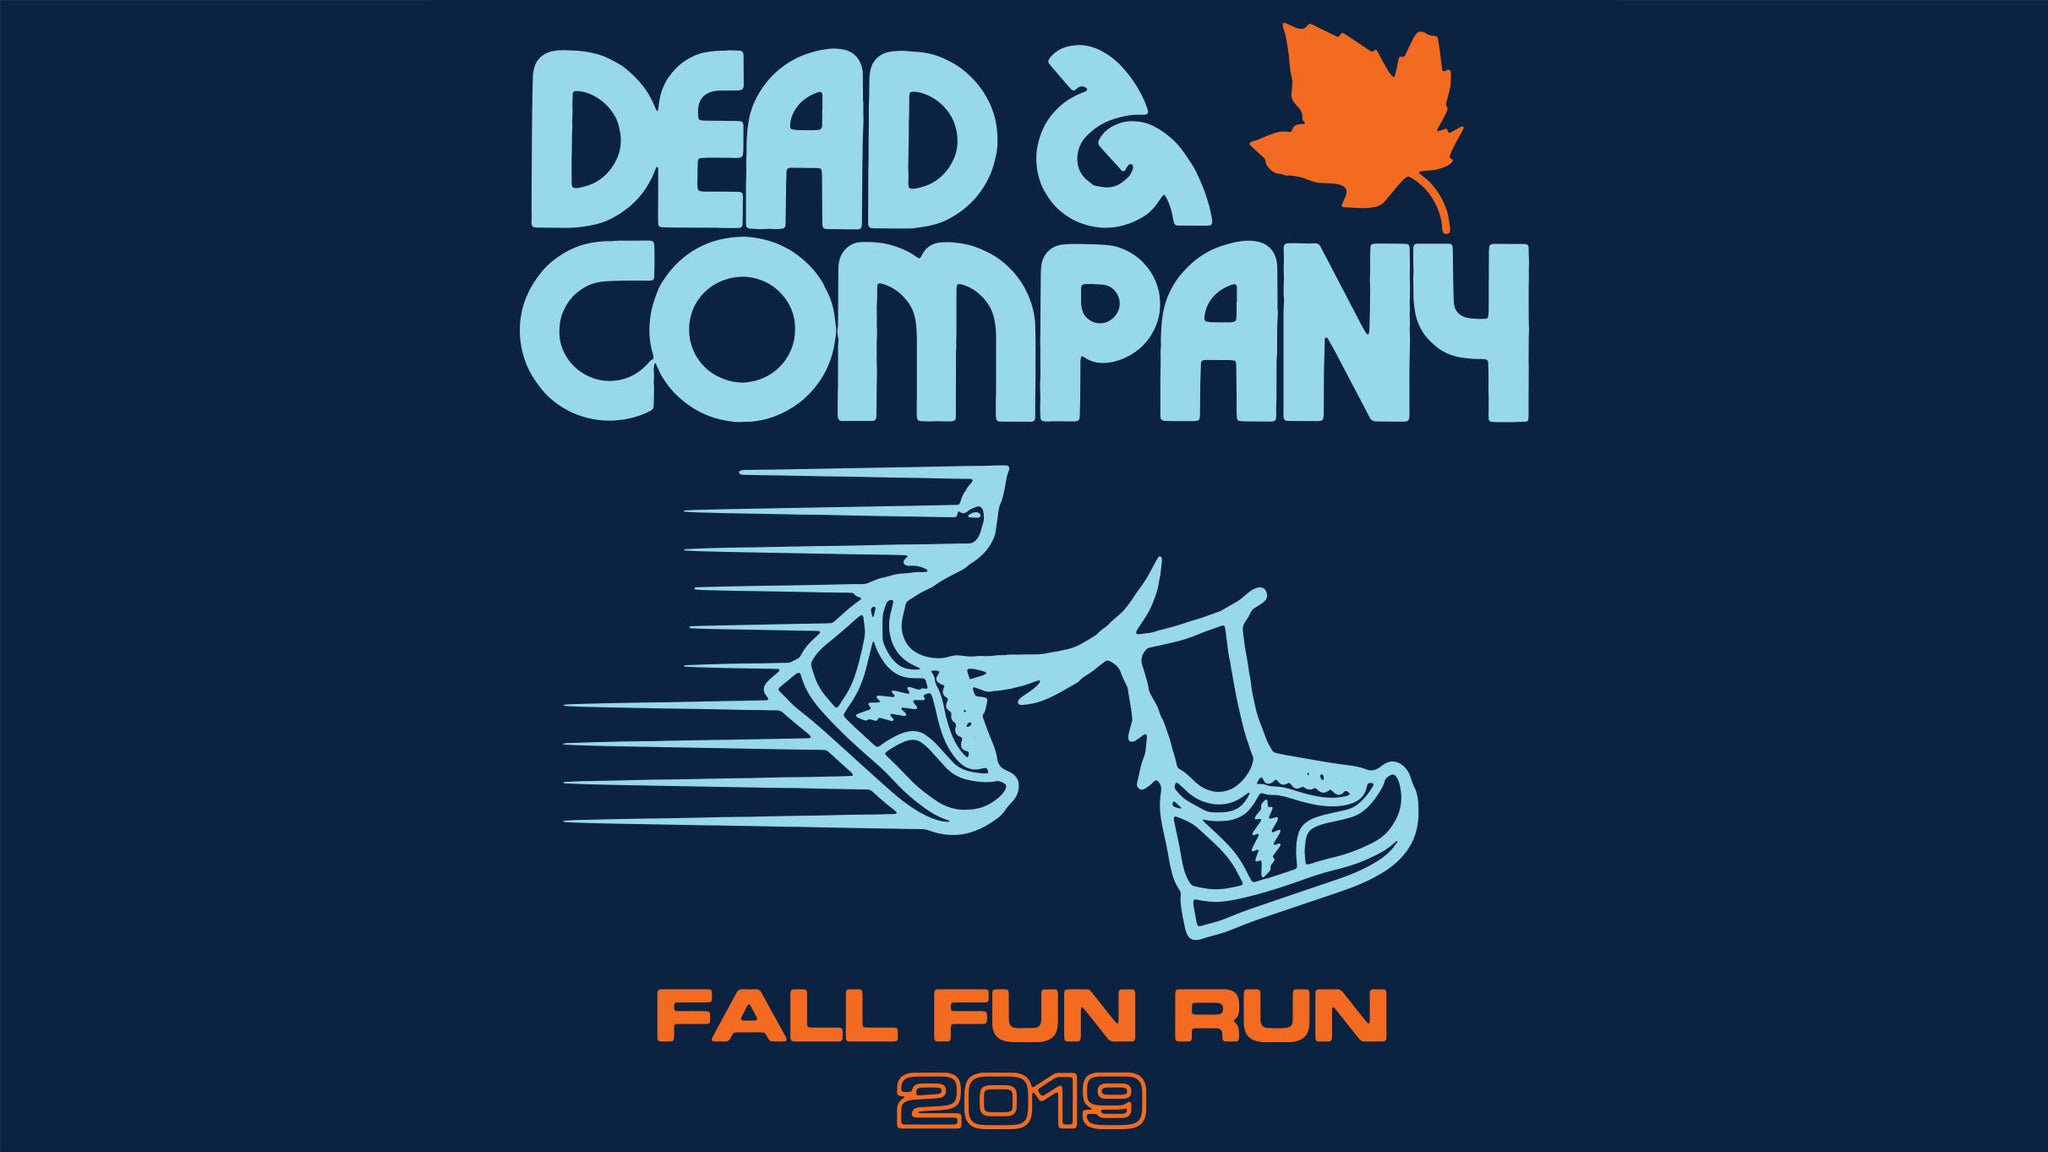 Dead & Company in Cuyahoga Falls promo photo for Official Platinum presale offer code